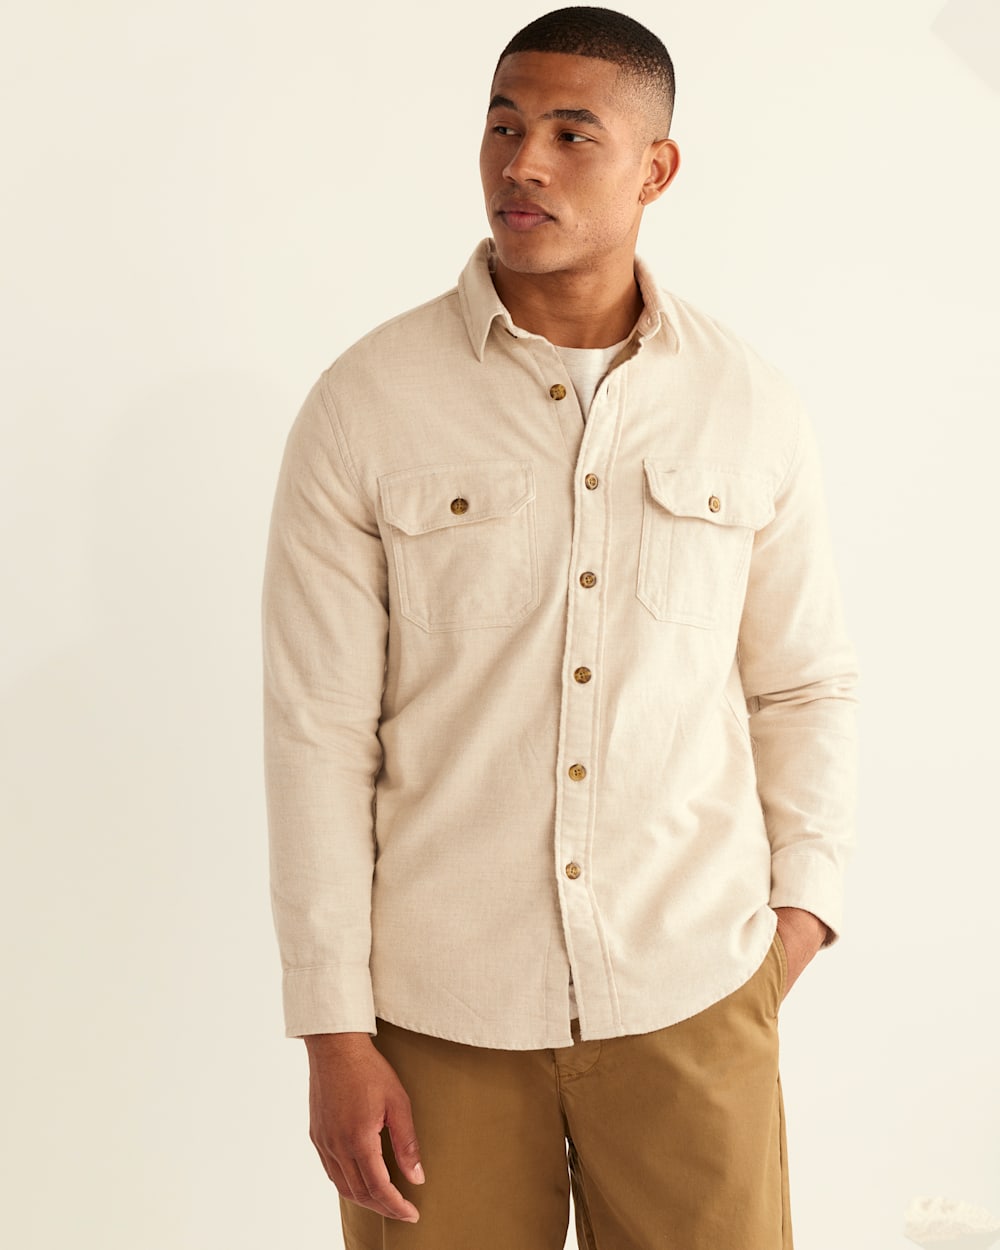 ALTERNATE VIEW OF MEN'S BURNSIDE DOUBLE-BRUSHED FLANNEL SHIRT IN SAND HEATHER image number 5